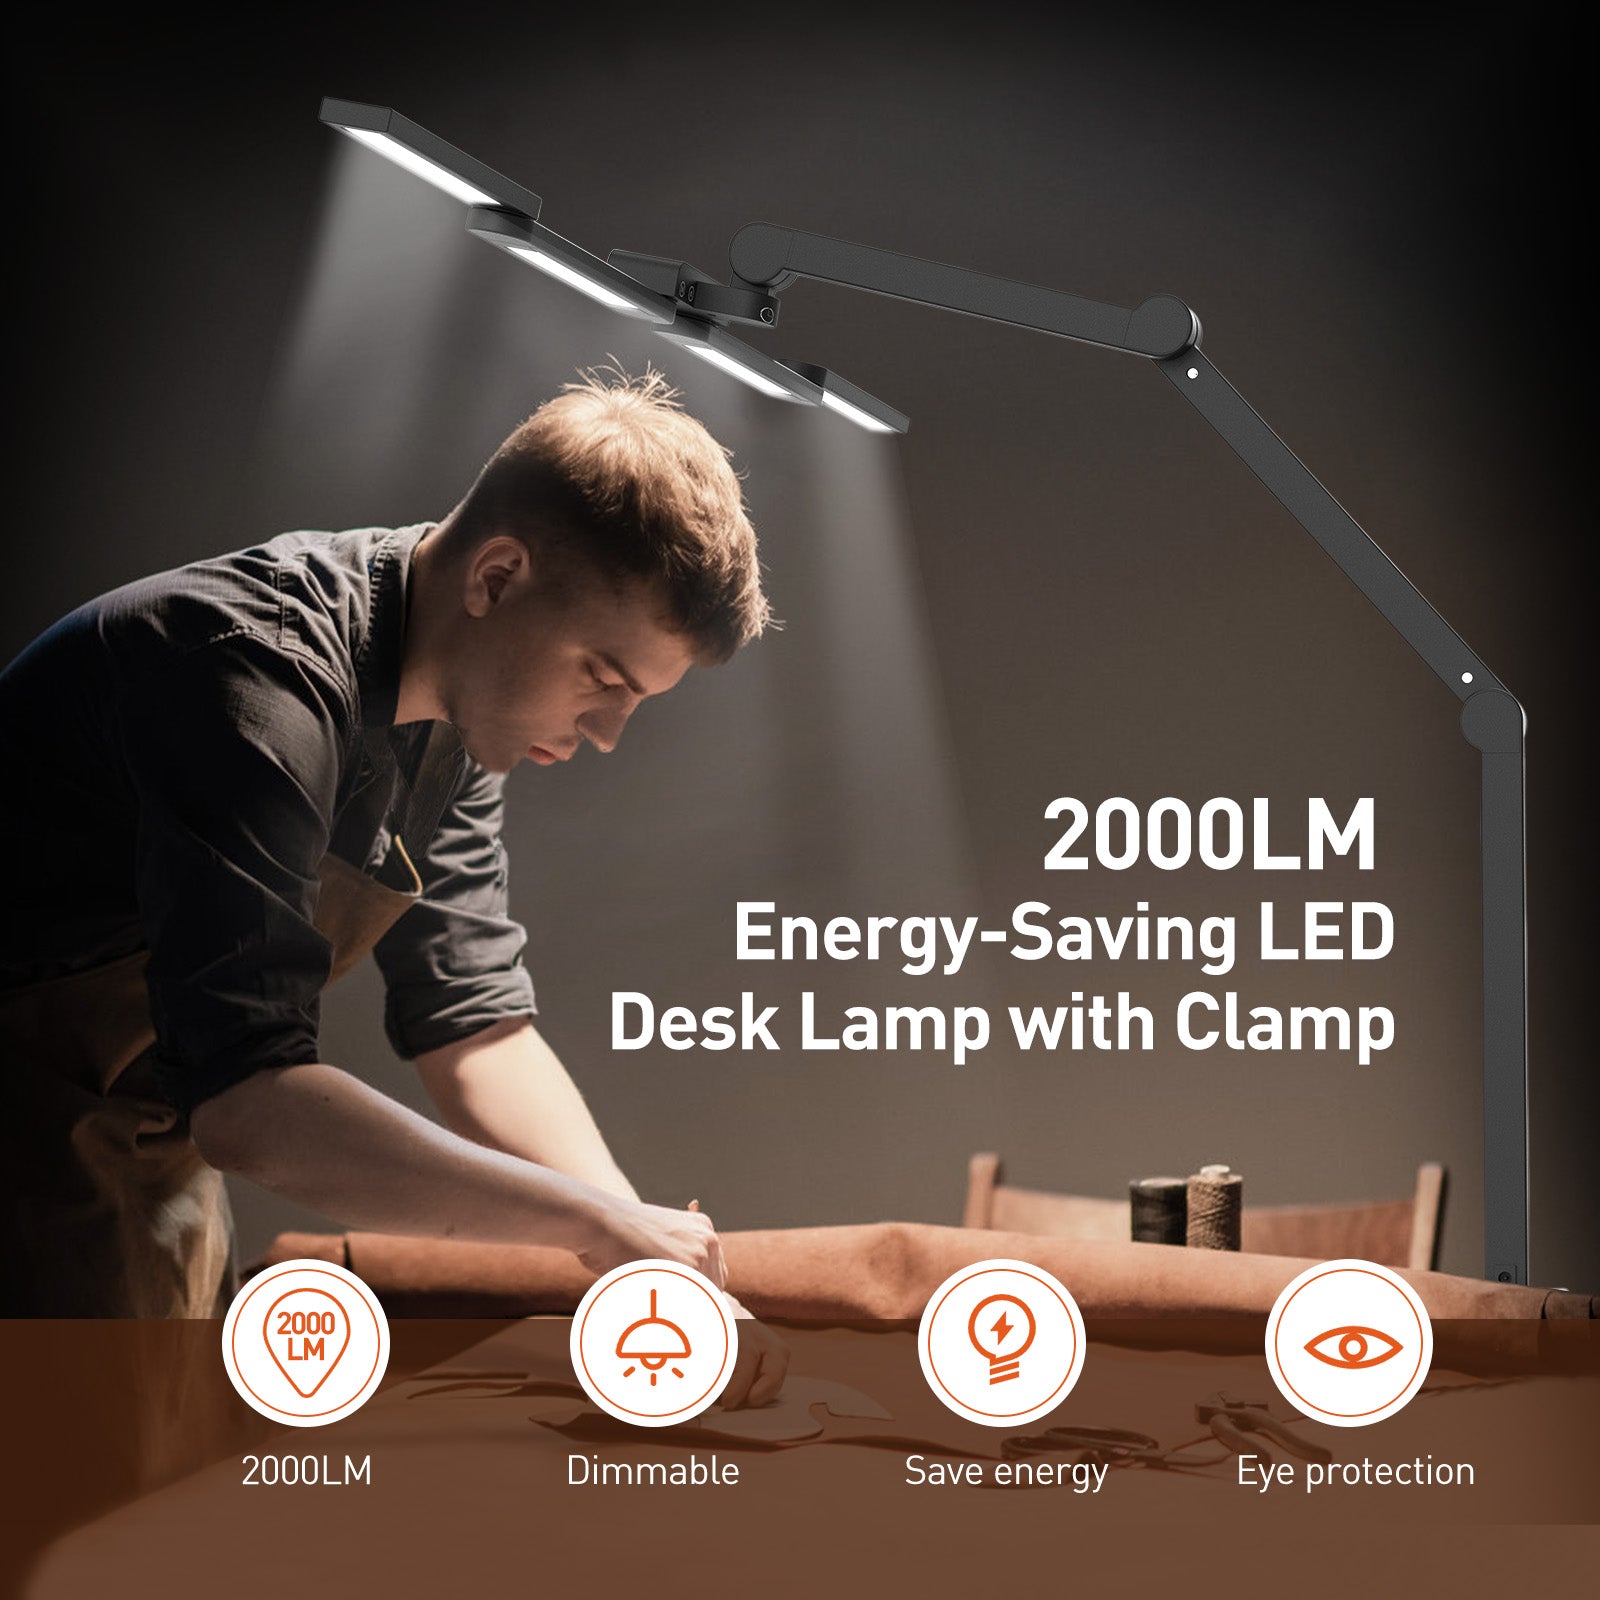 Sympa LED Desk Lamp with Clamp, 40" Large Adjustable Desk Lamps for Home Office, Stepless Dimming, 7 Brightness & 5 Colors Temperatures